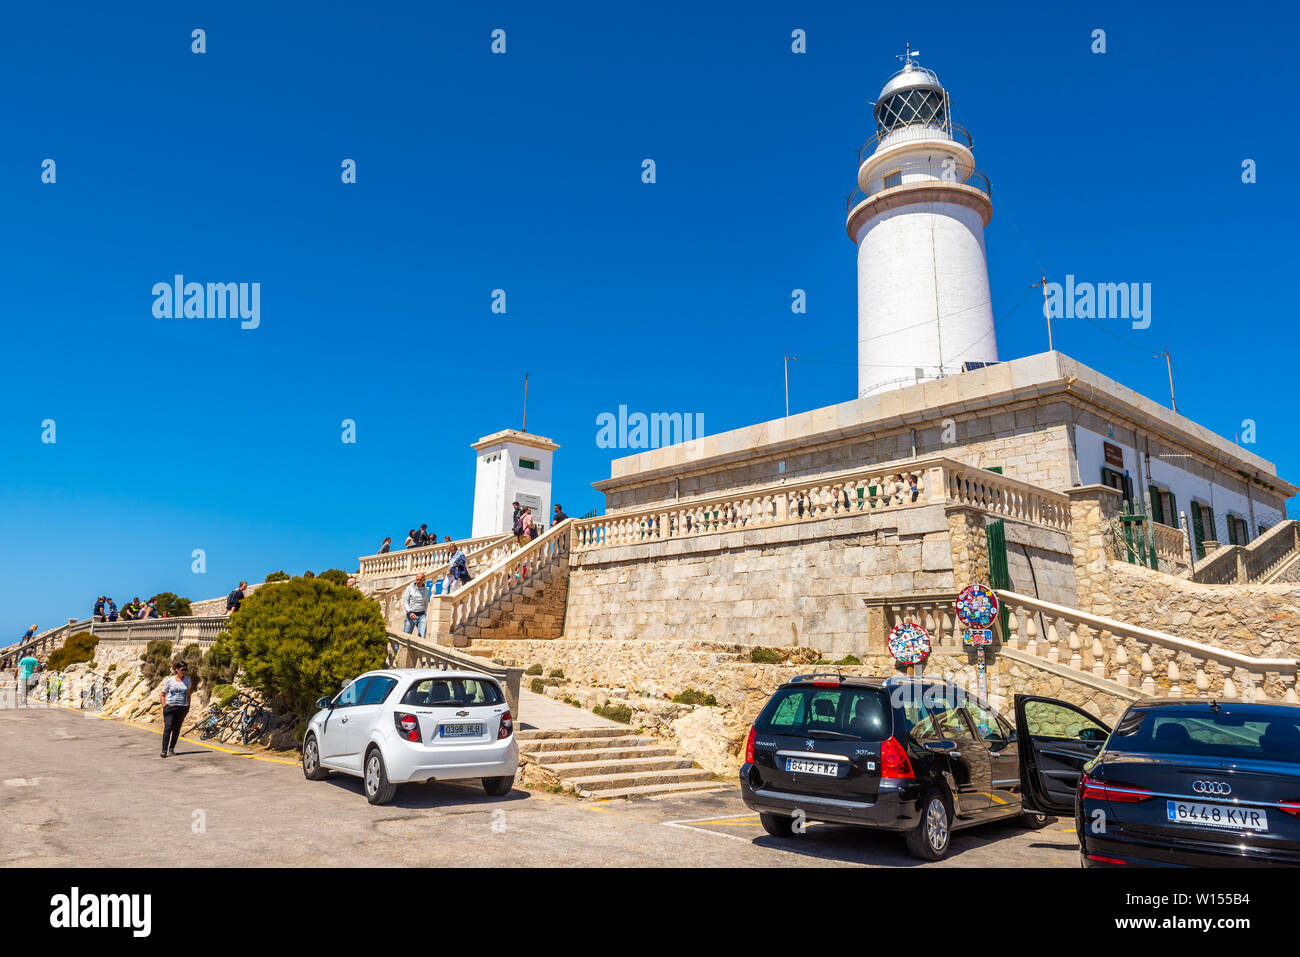 MALLORCA, SPAIN - May 6, 2019: Lighthouse at Cap de Formentor in the coast of north Mallorca, Balearic Islands, Spain Stock Photo